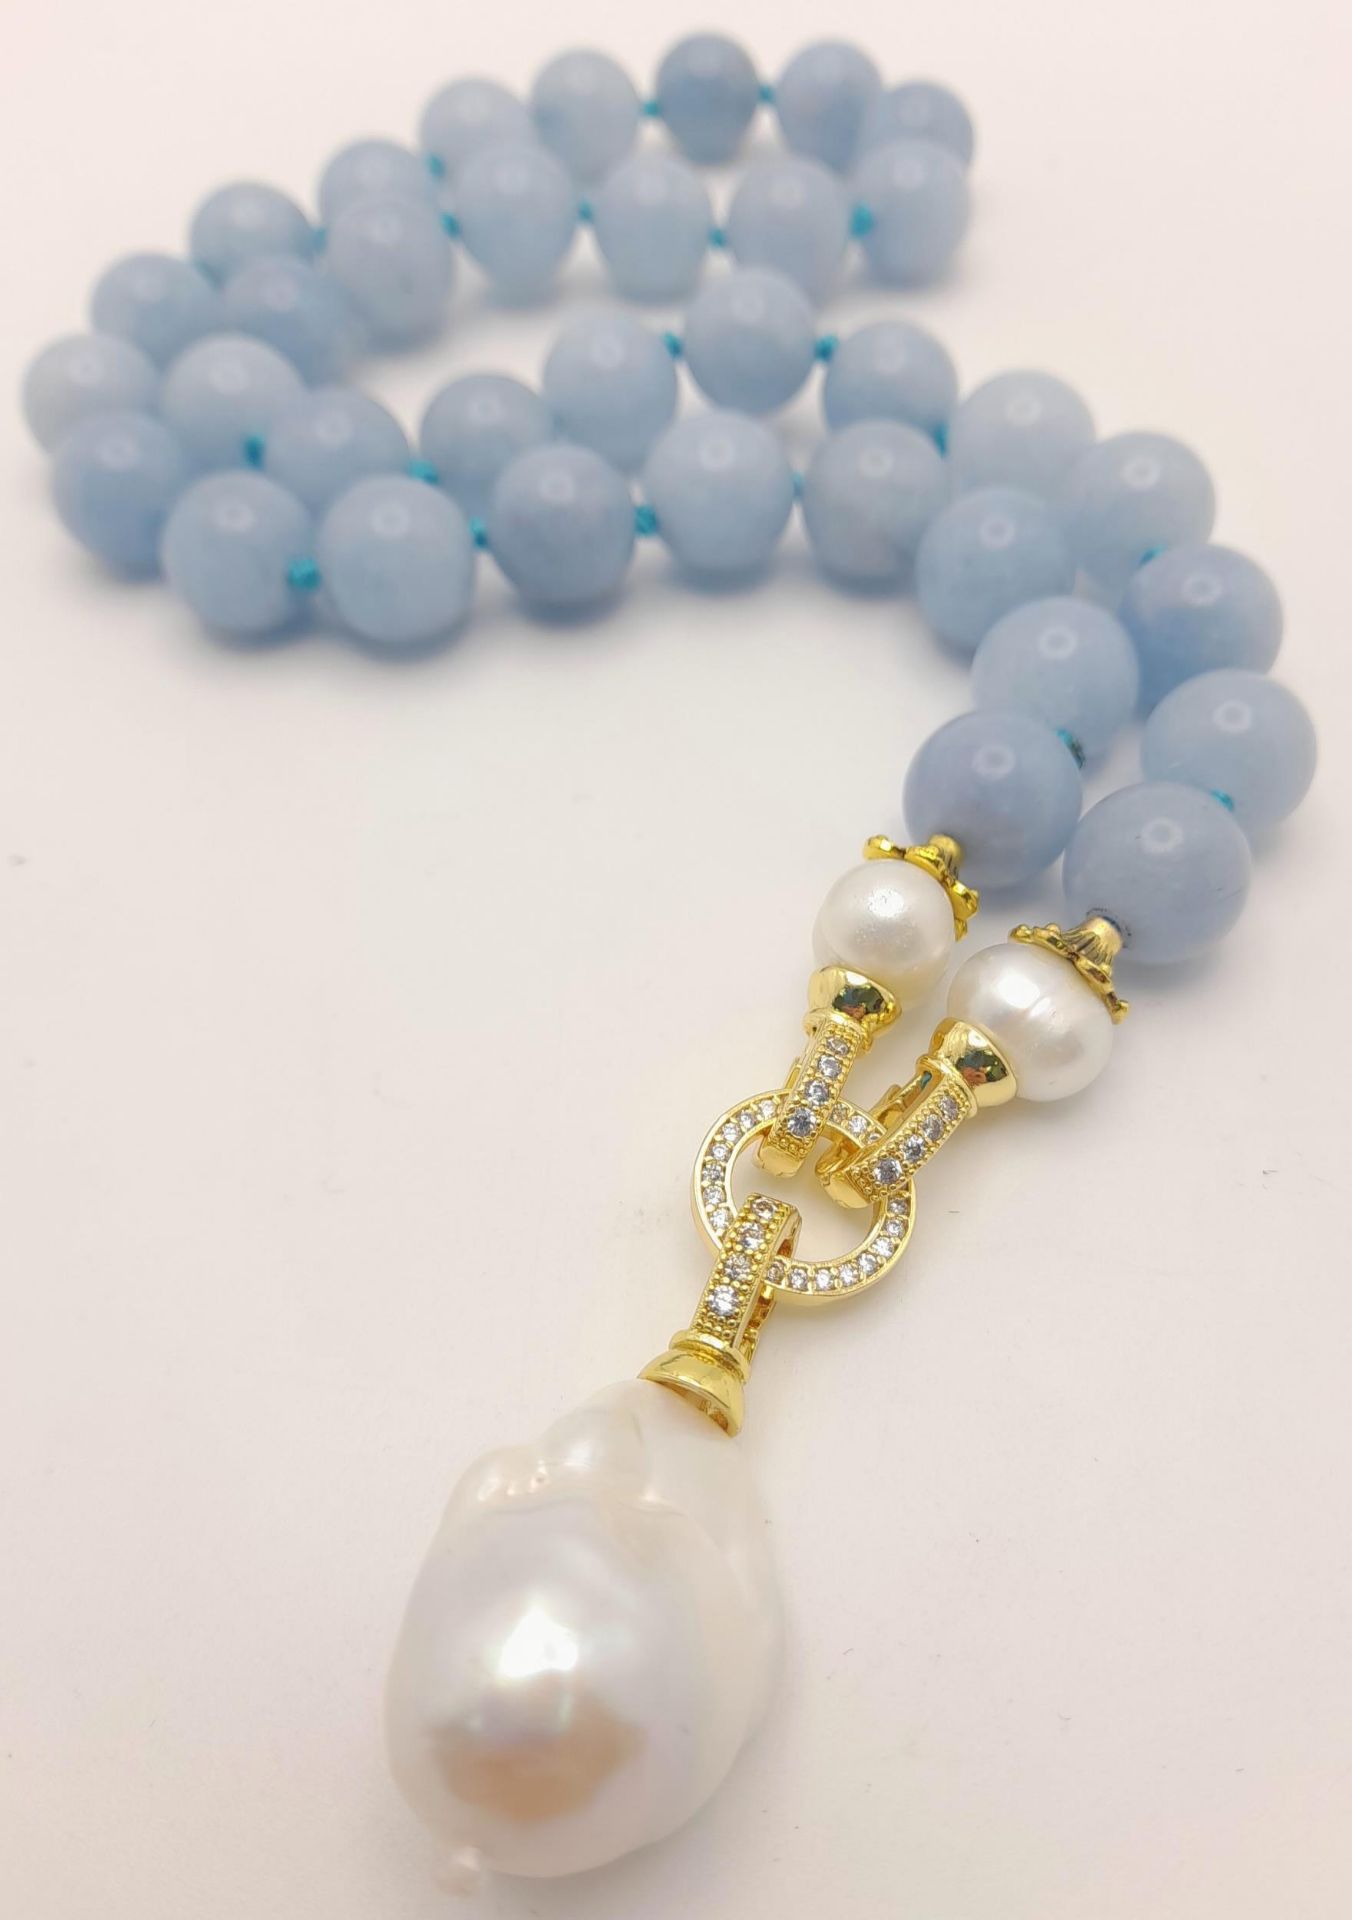 A Blue Aquamarine Beaded Necklace with a Hanging Keisha Baroque Pearl Pendant. Gilded clasp. White - Image 2 of 5